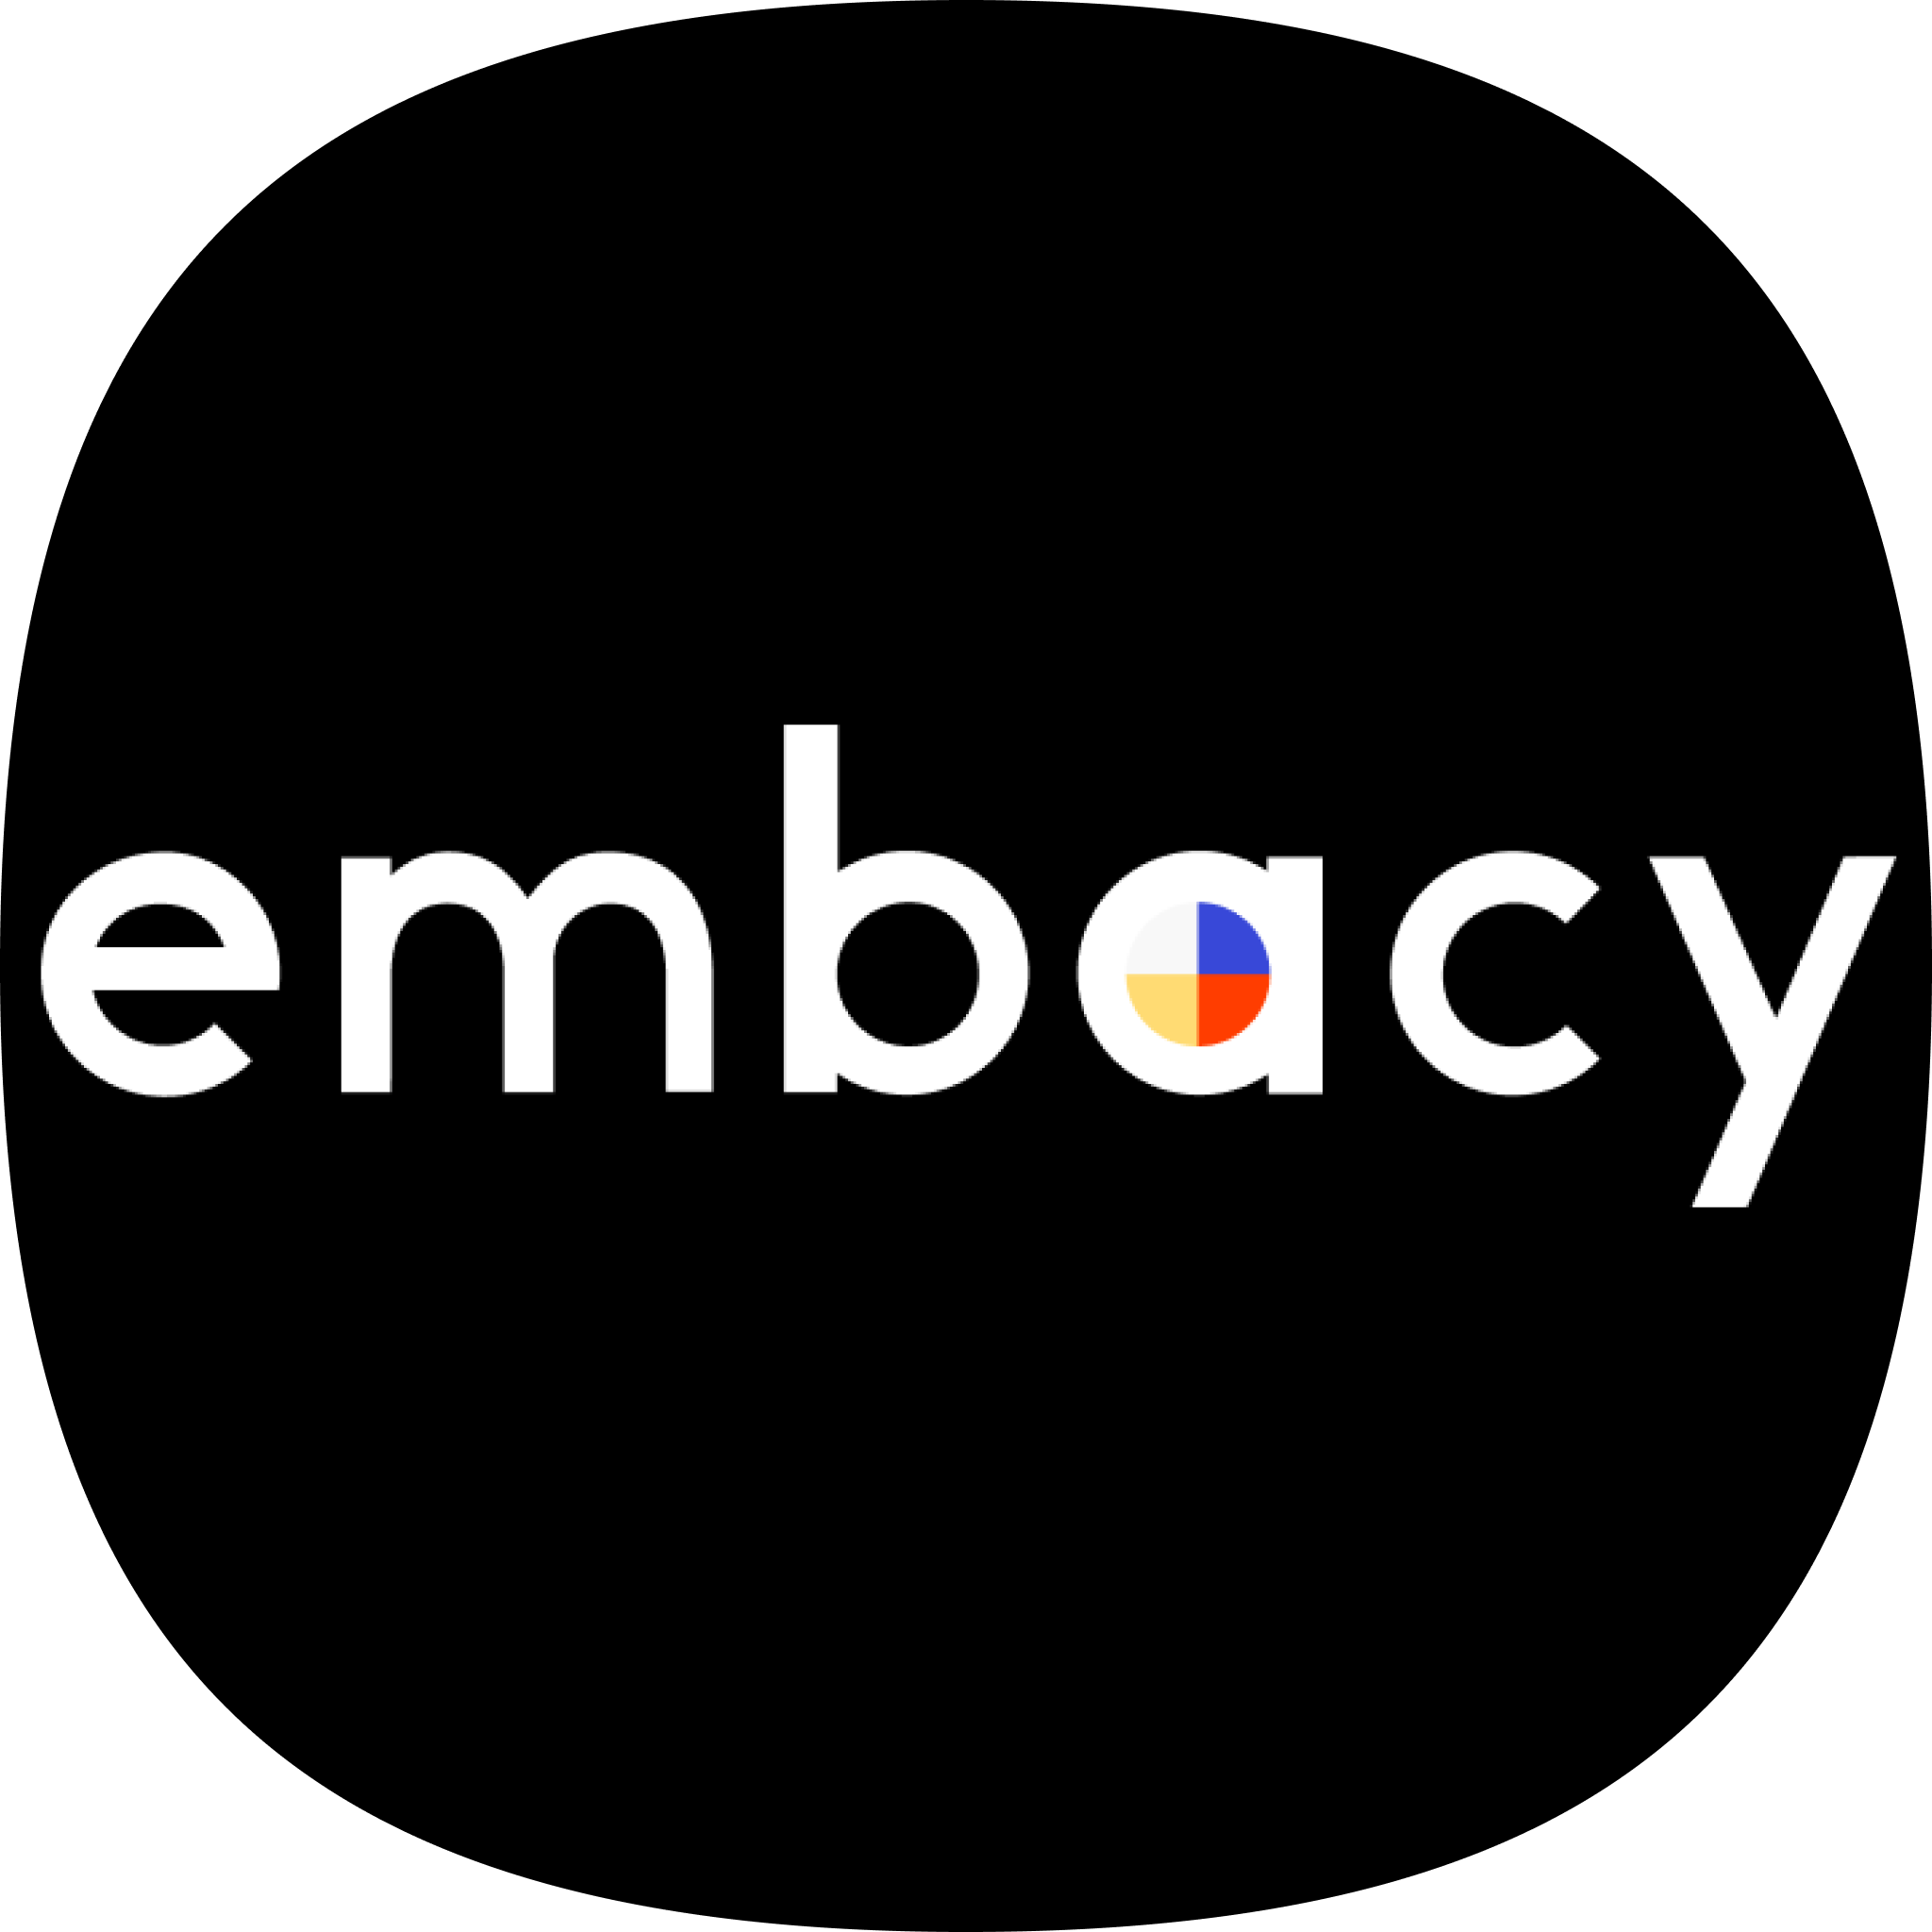 Embacy 